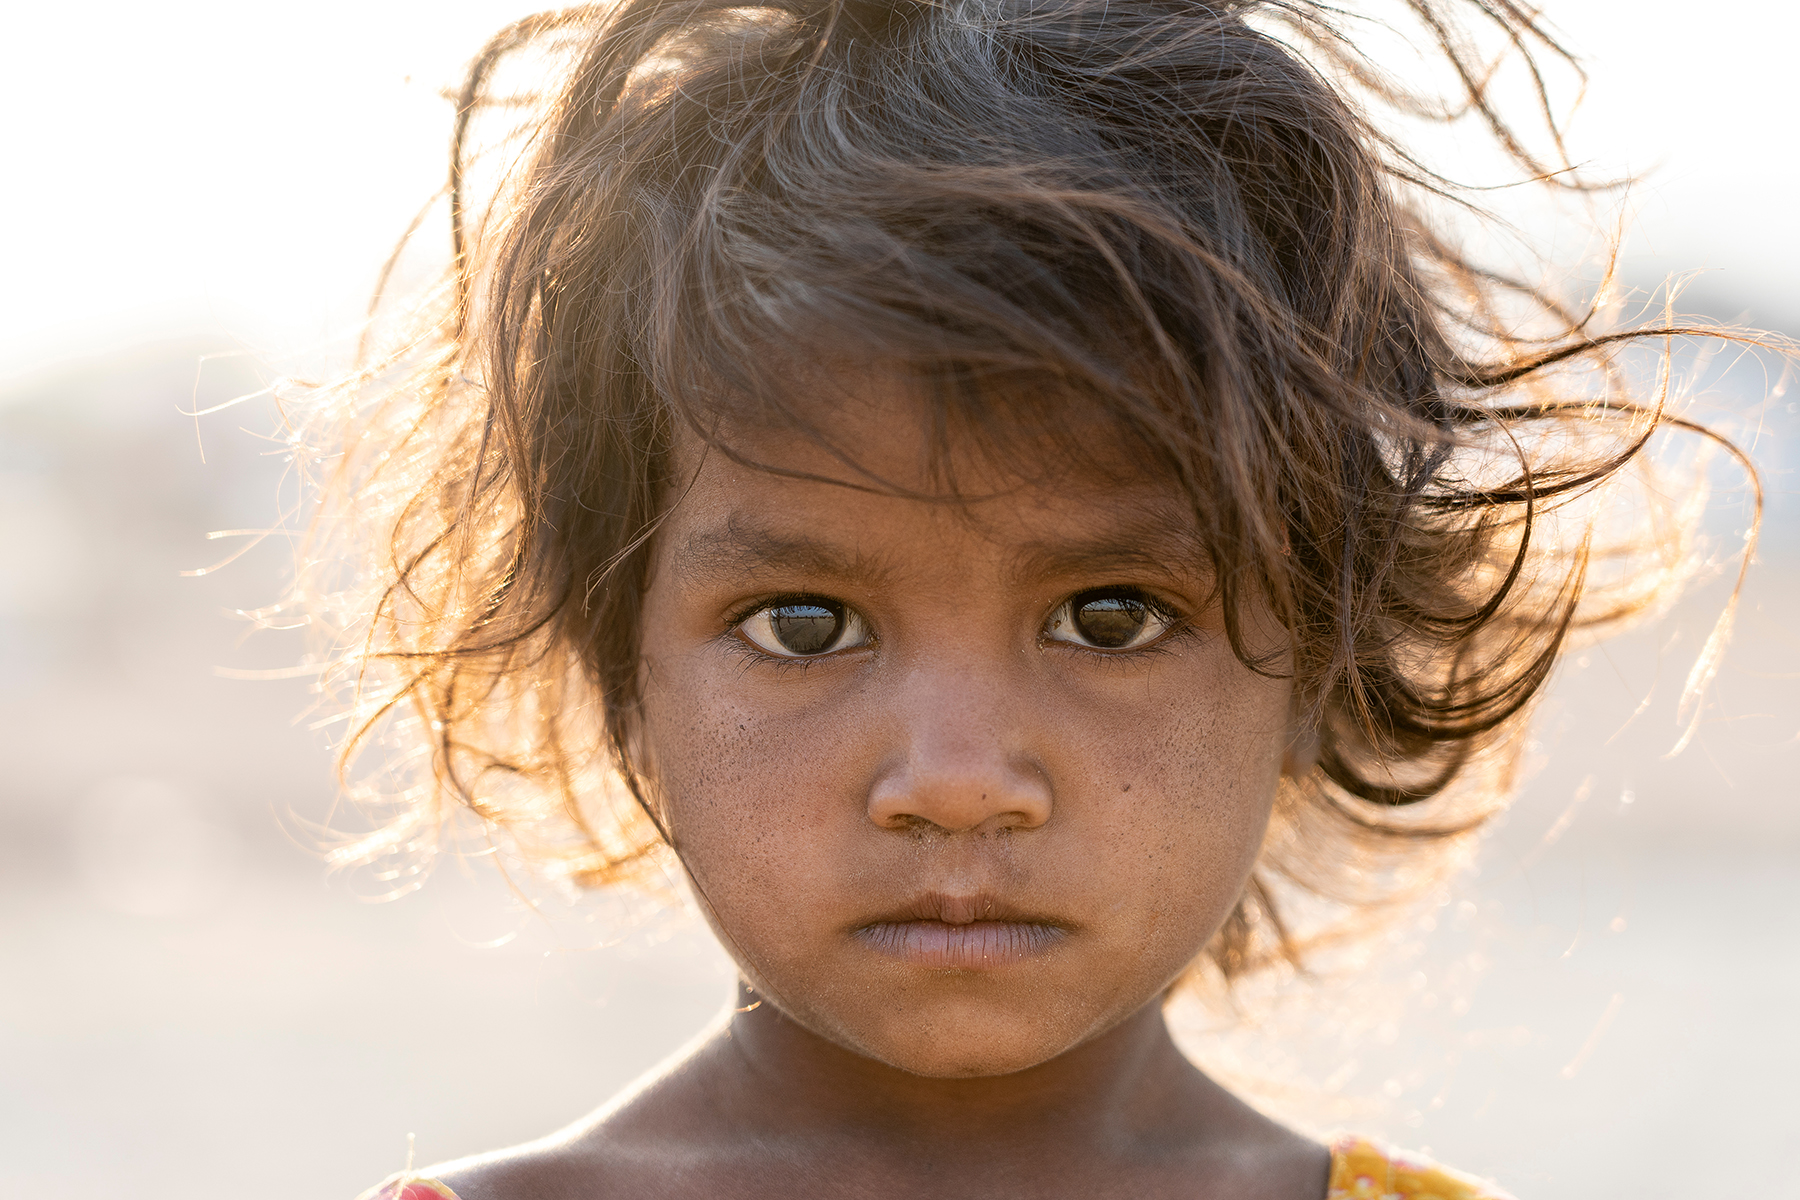 Photo of a little girl looking at the camera from Shutterstock.